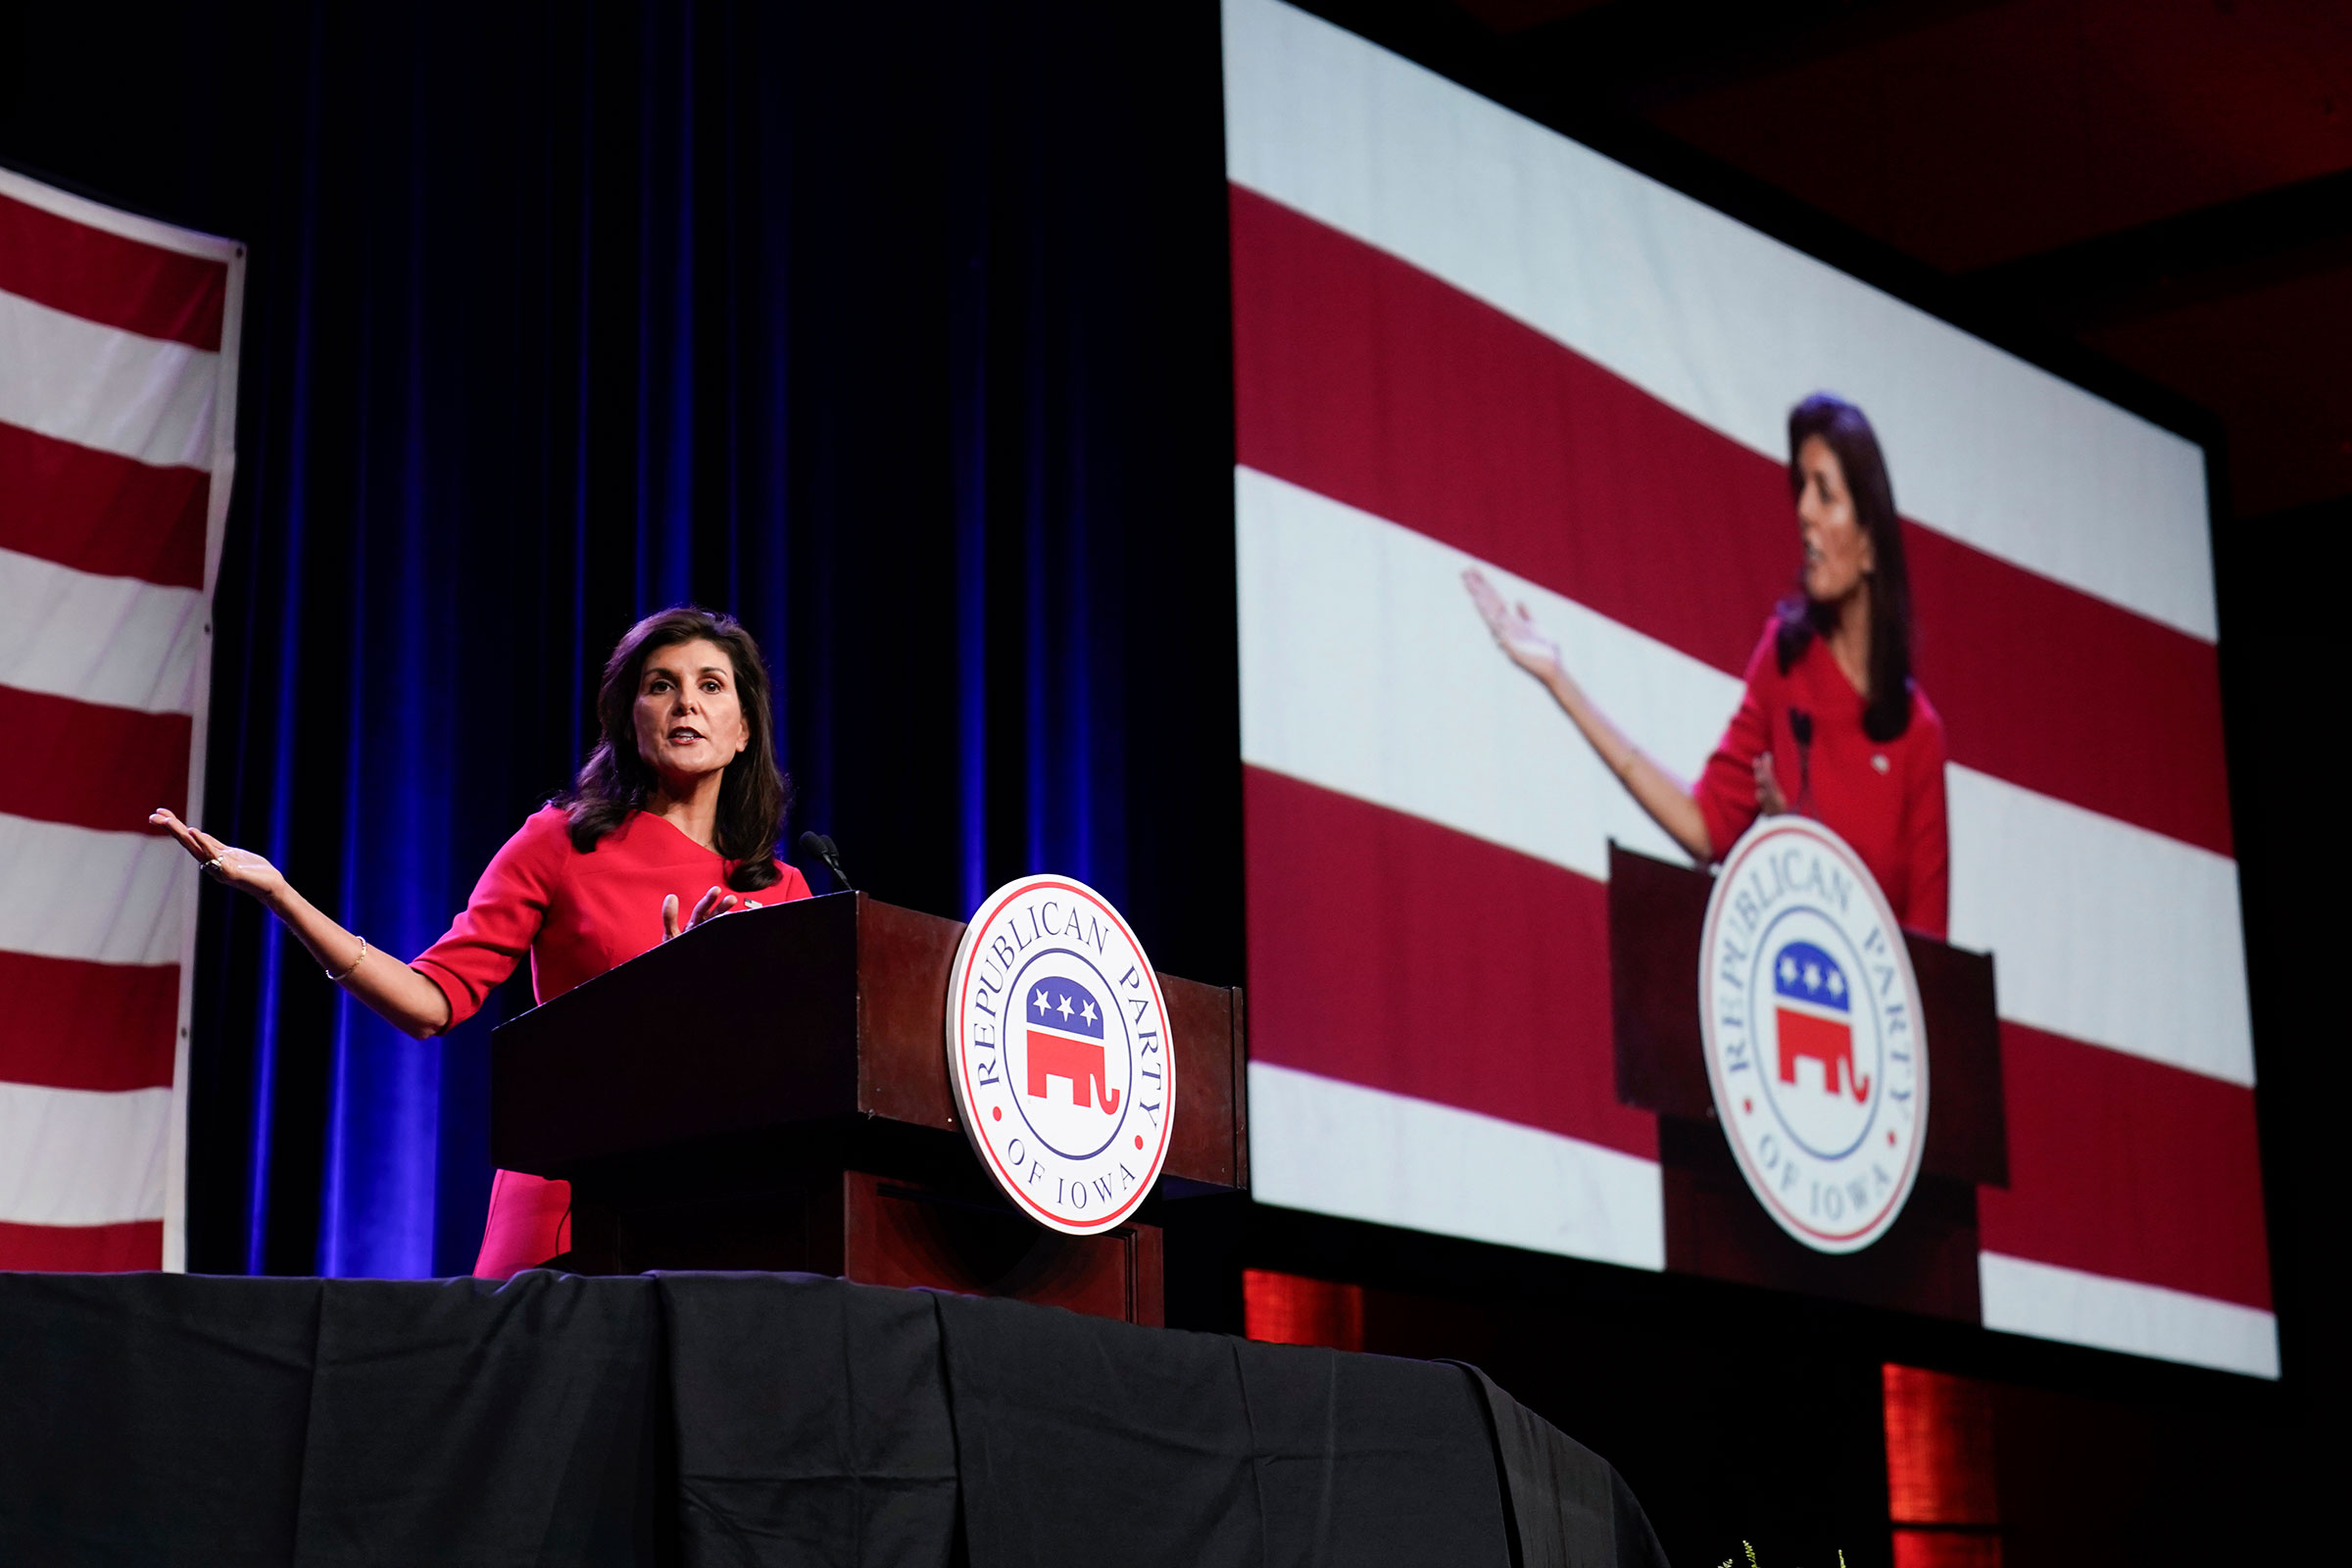 Niki Haley in a red dress gestures and stands at a podium while she speaks with a screen projecting her speaking is seen to her right